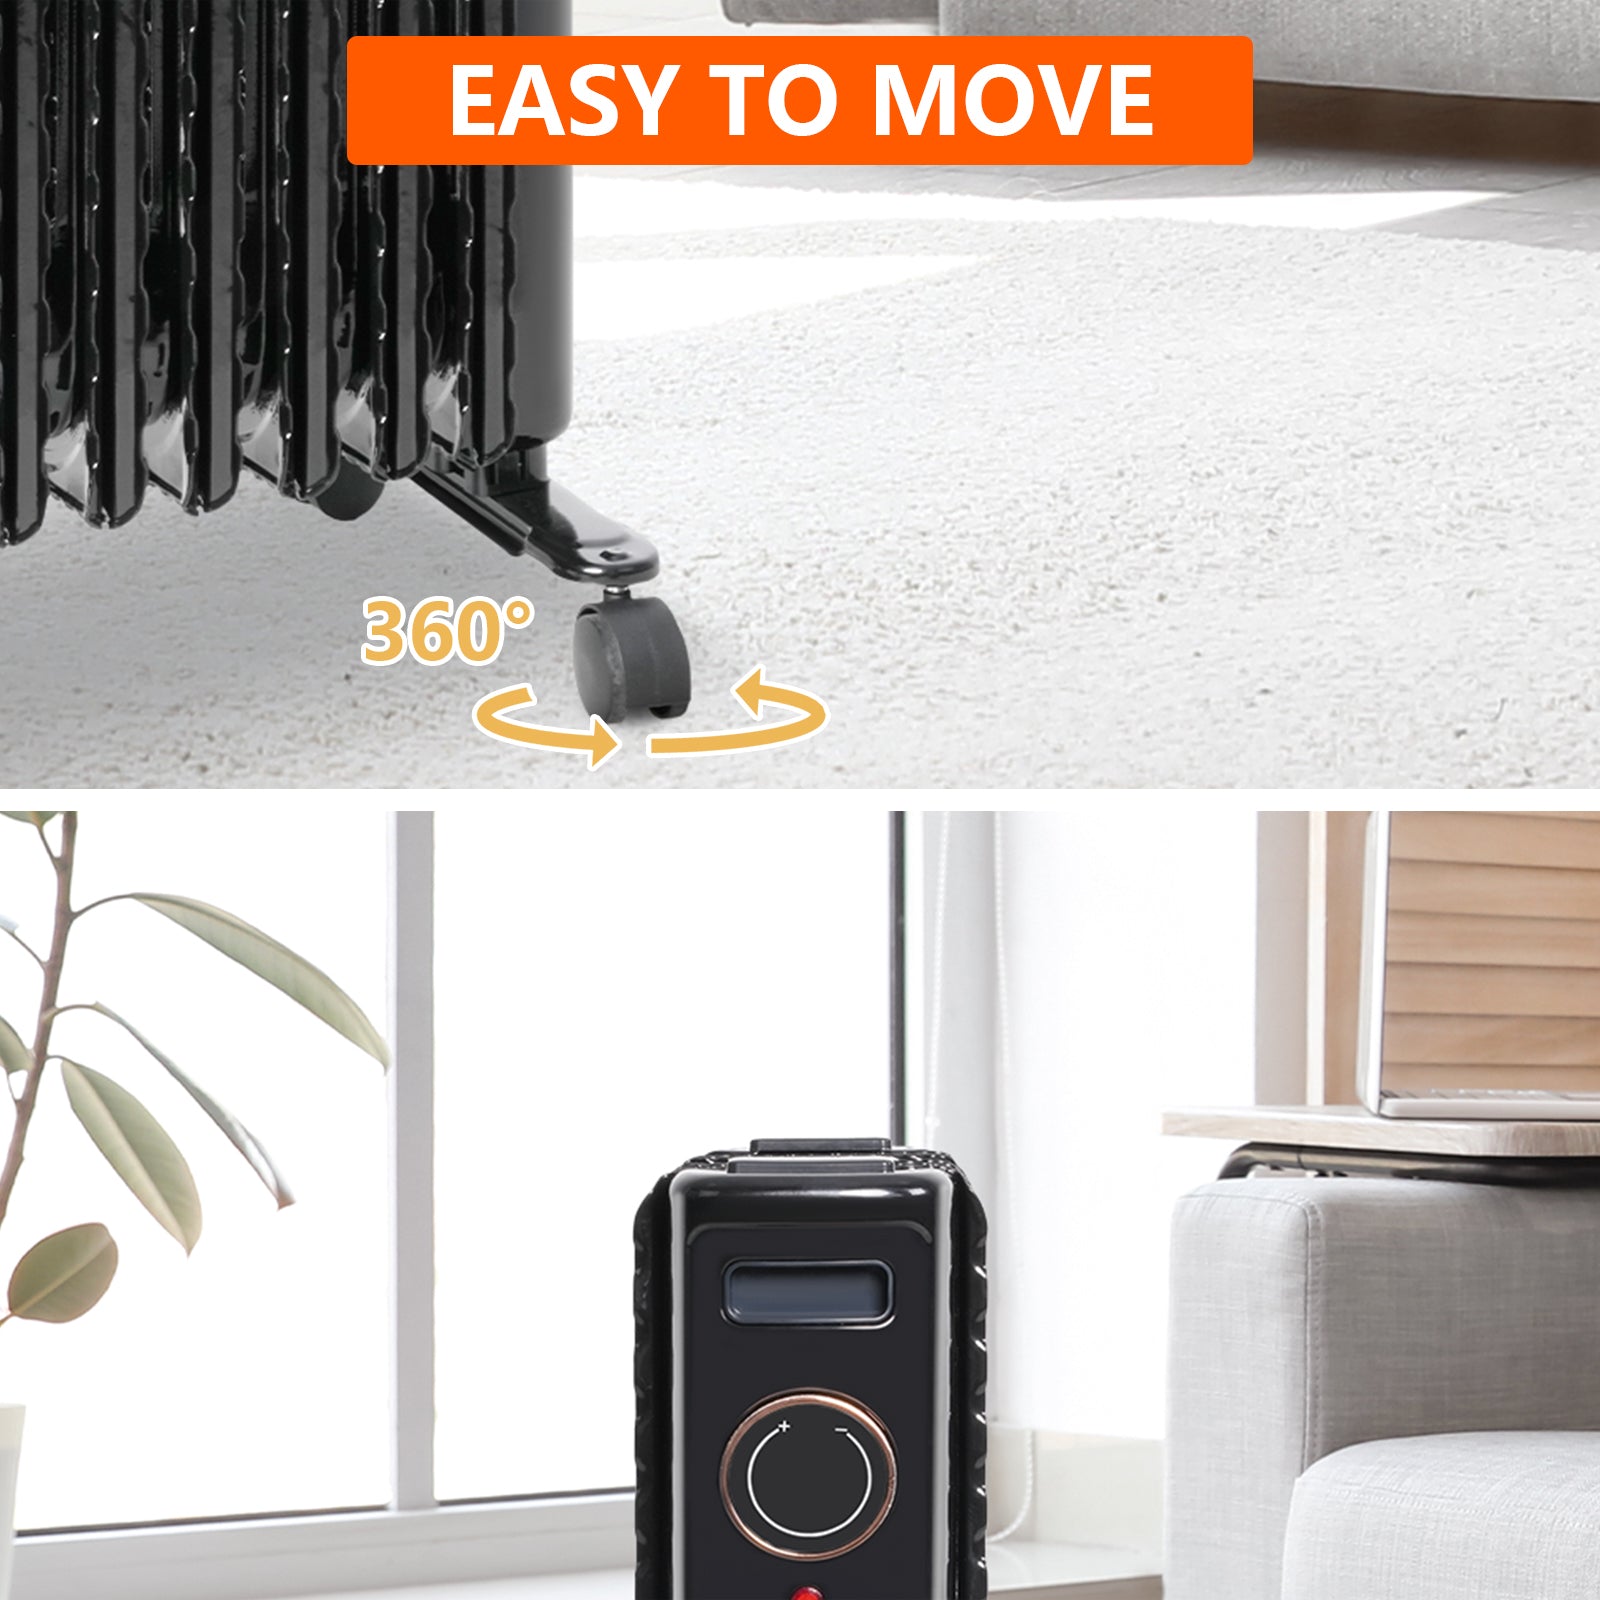 1500W Portable Electric Radiator Oil Filled Heater With 3 Heating Modes, Adjustable Thermostat, Black